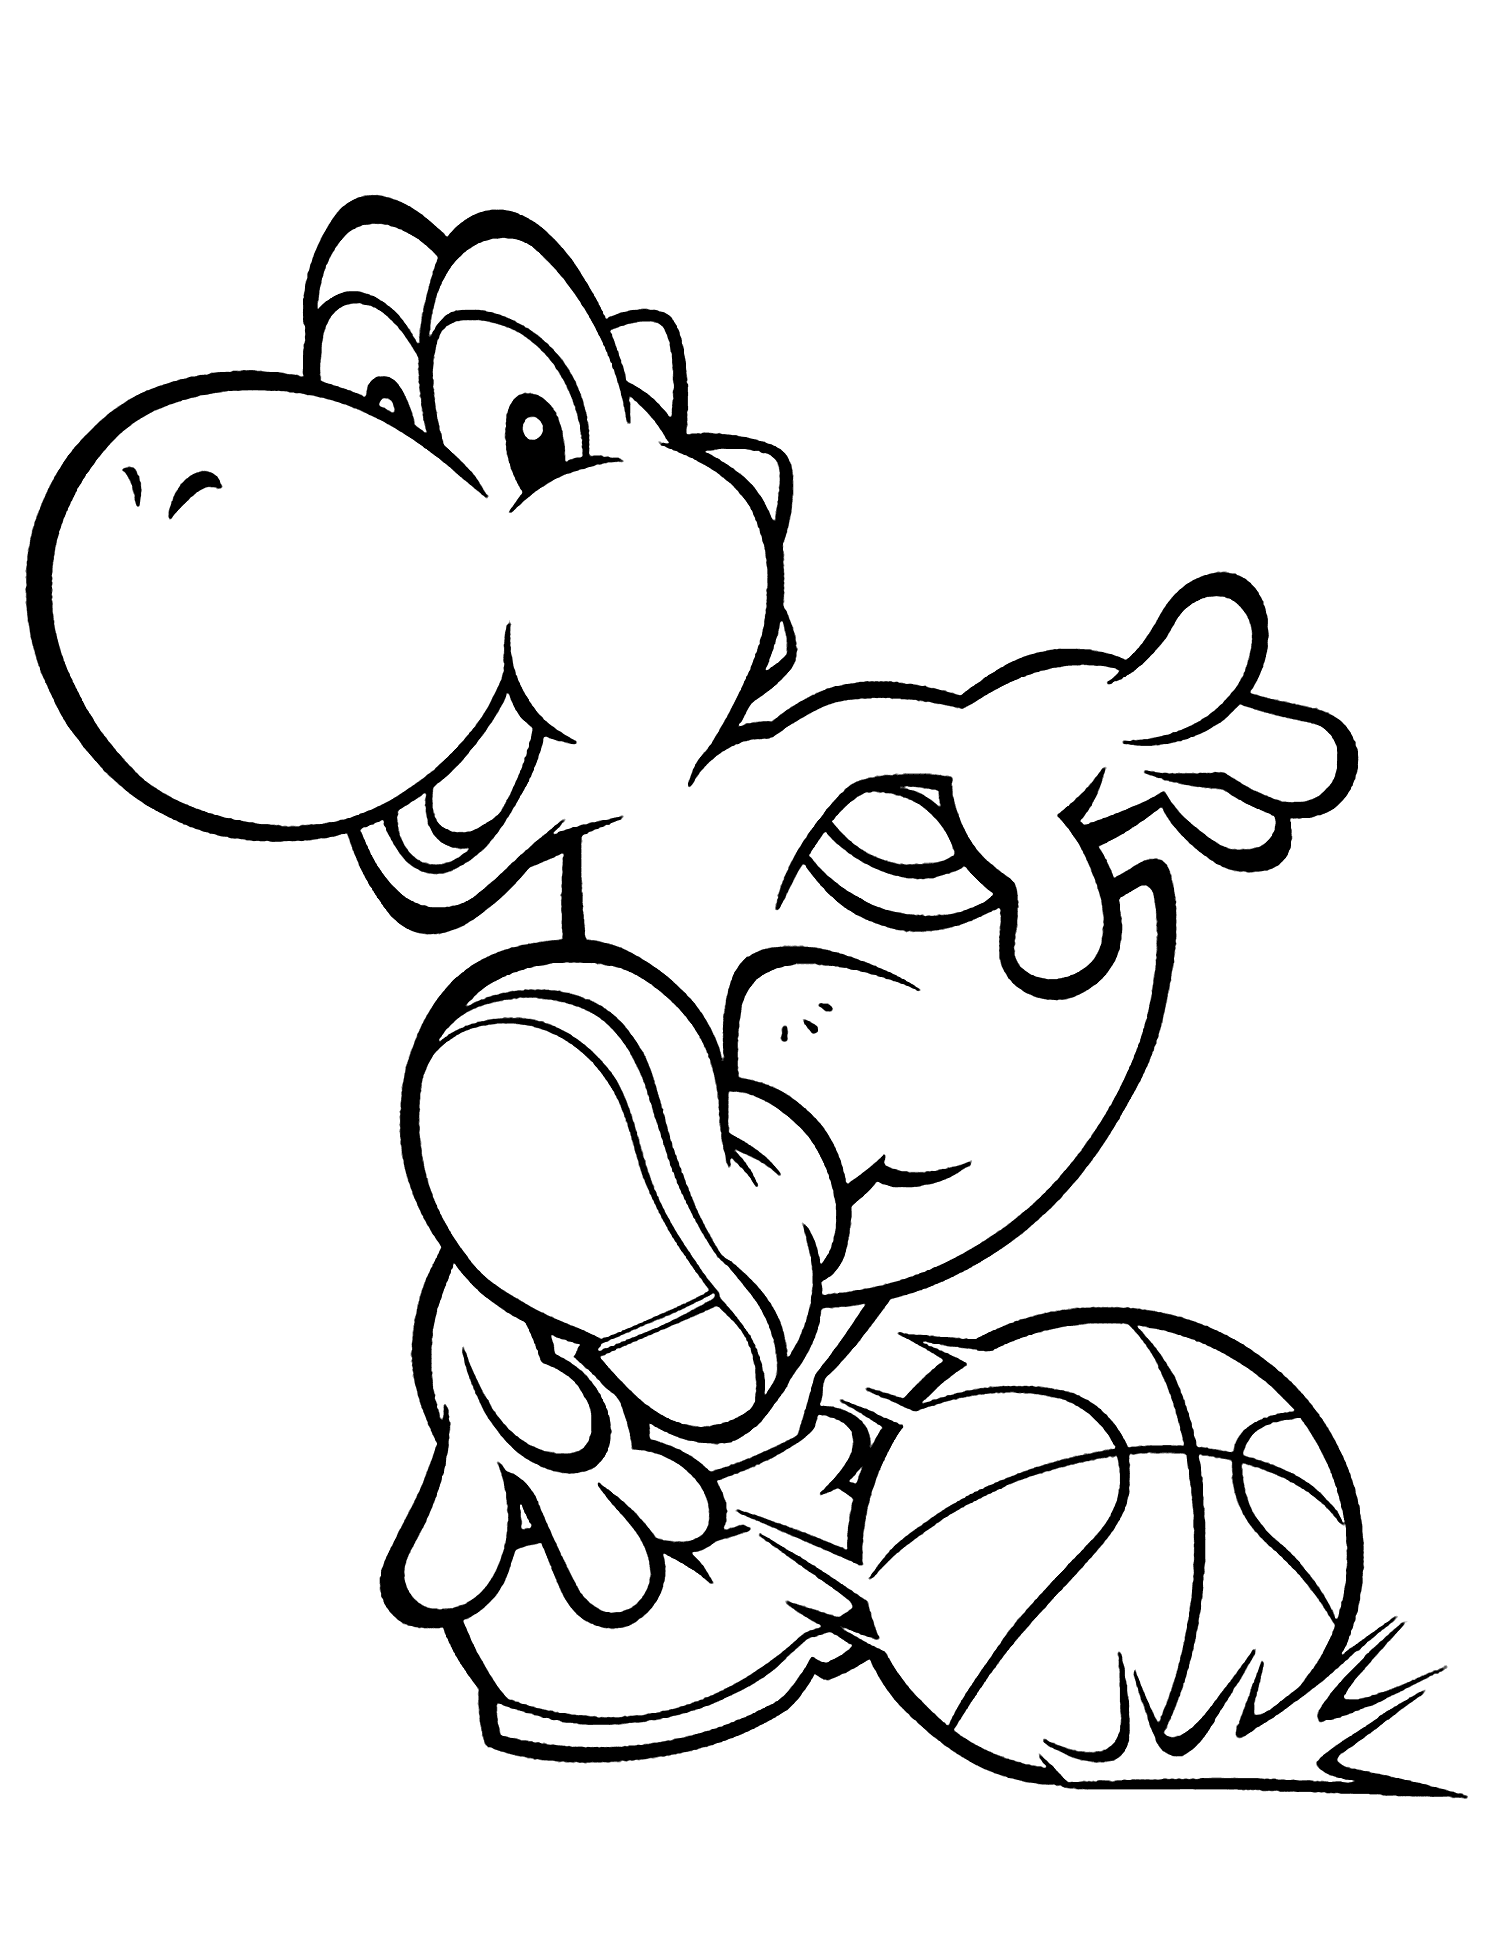 Basket Ball Cute For Children Coloring Page